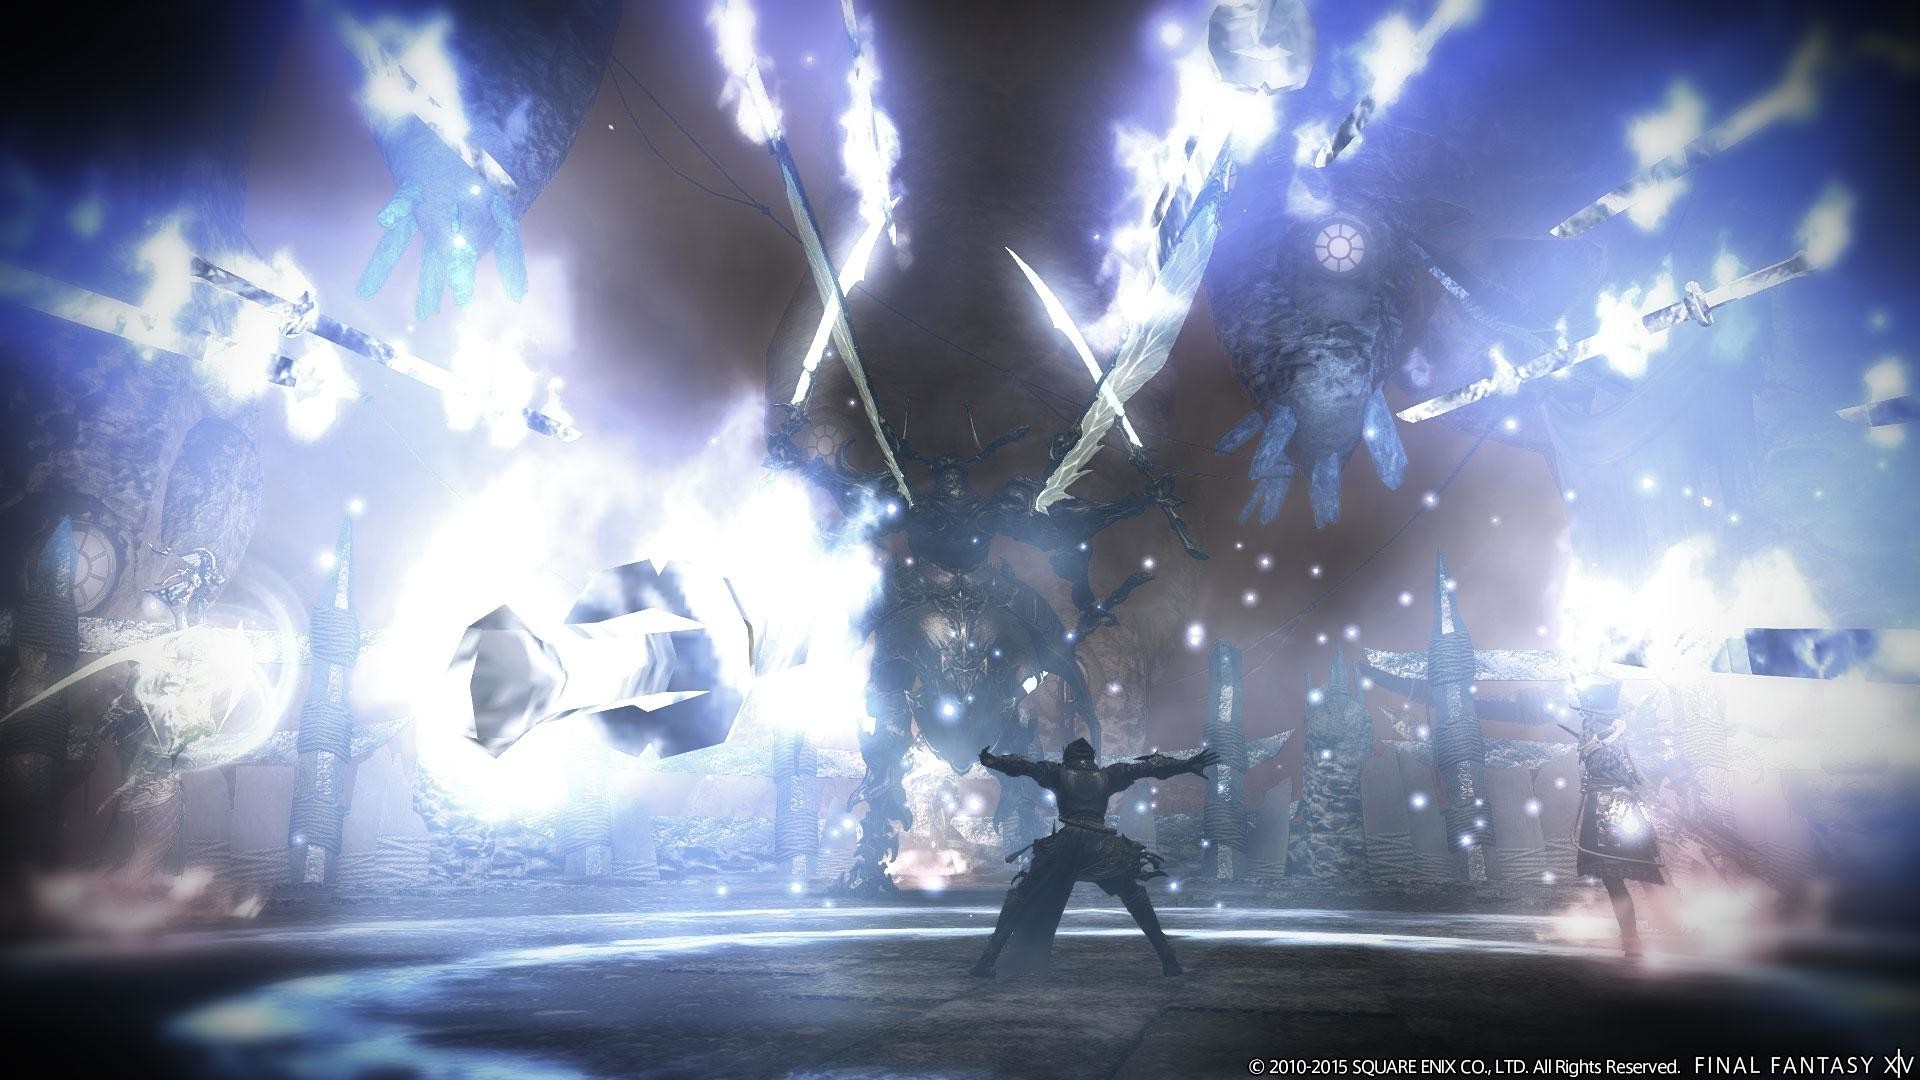 1920x1080 Square Enix announces Final Fantasy XIV has over 5 million registered users  worldwide